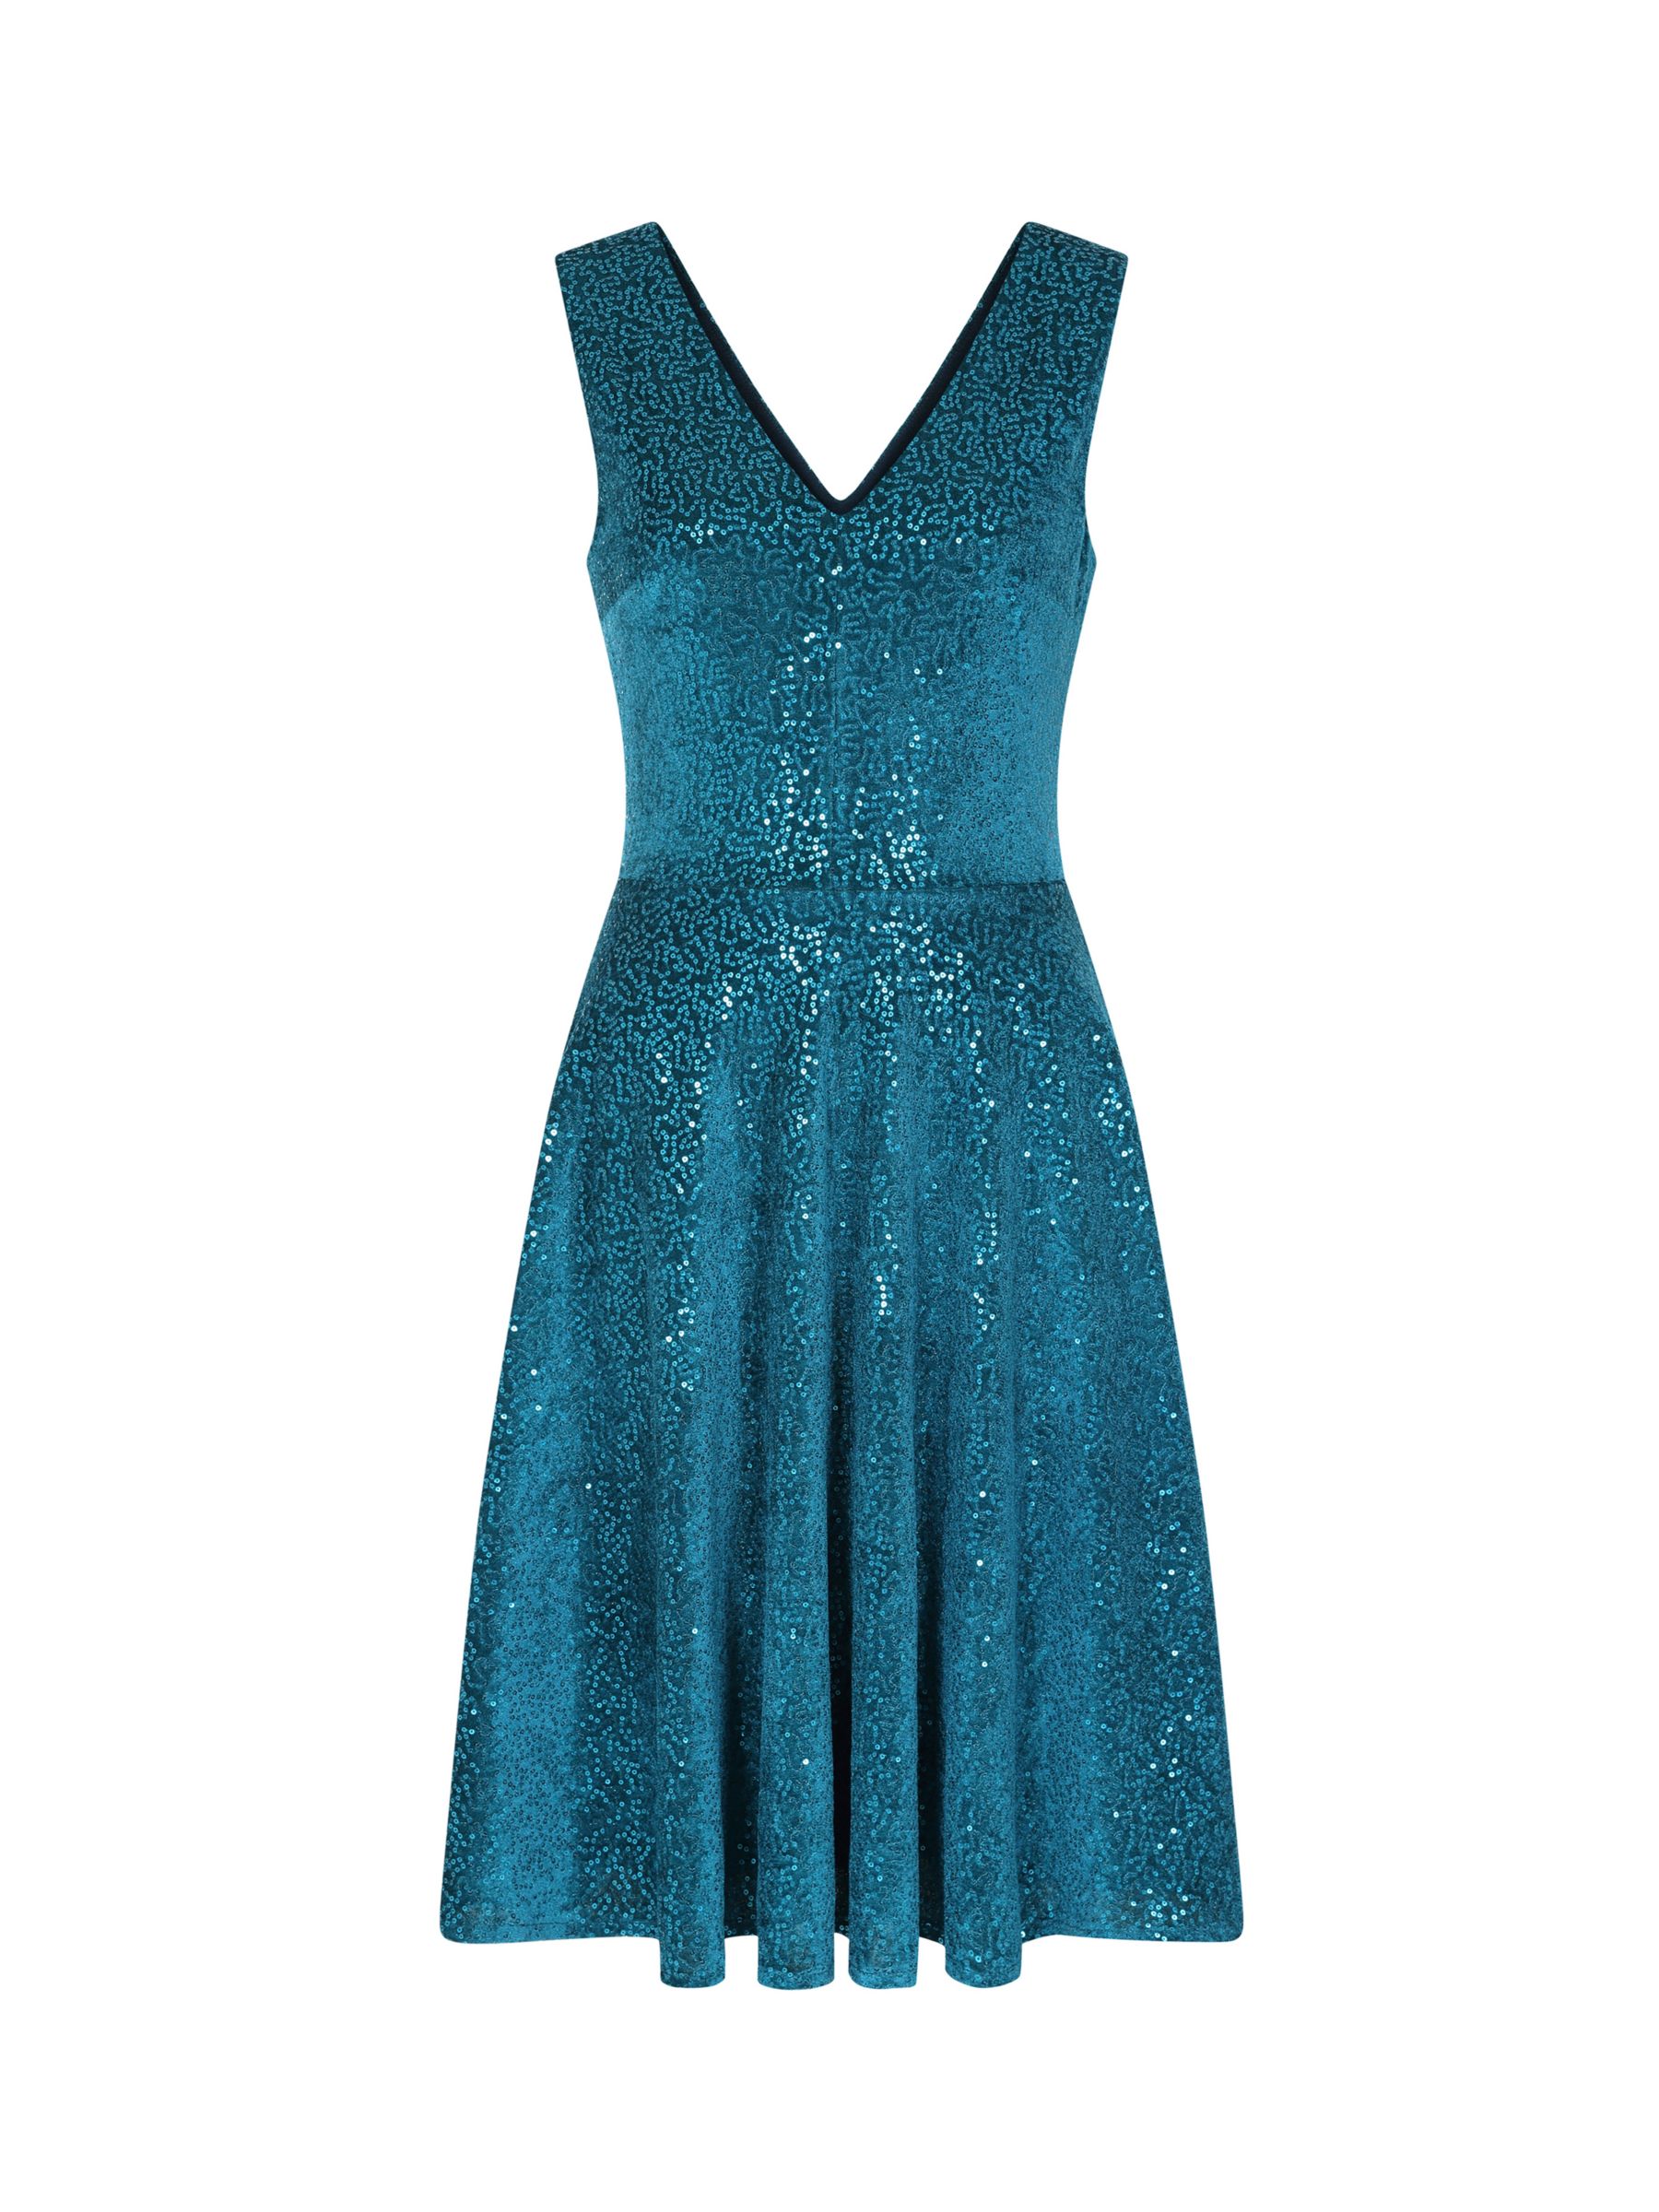 HotSquash Velvet Sequin Fit and Flare Dress, Turquoise at John Lewis ...